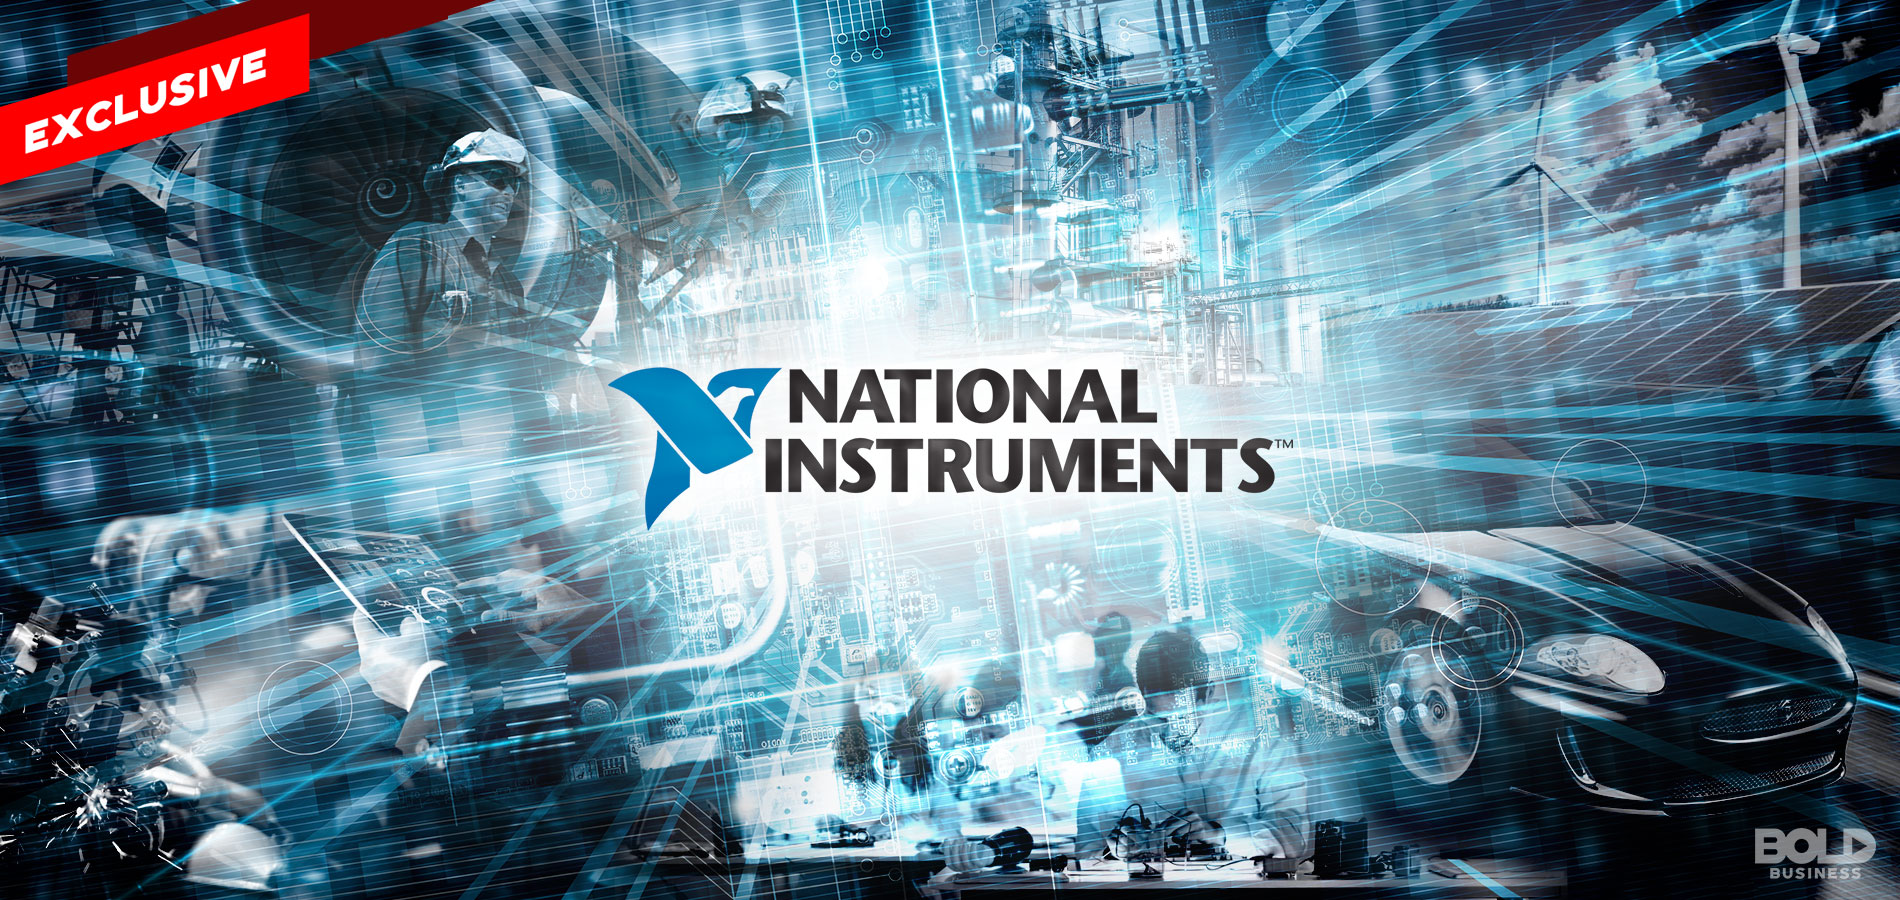 National Instruments: Creating the Tools That Drive Innovation